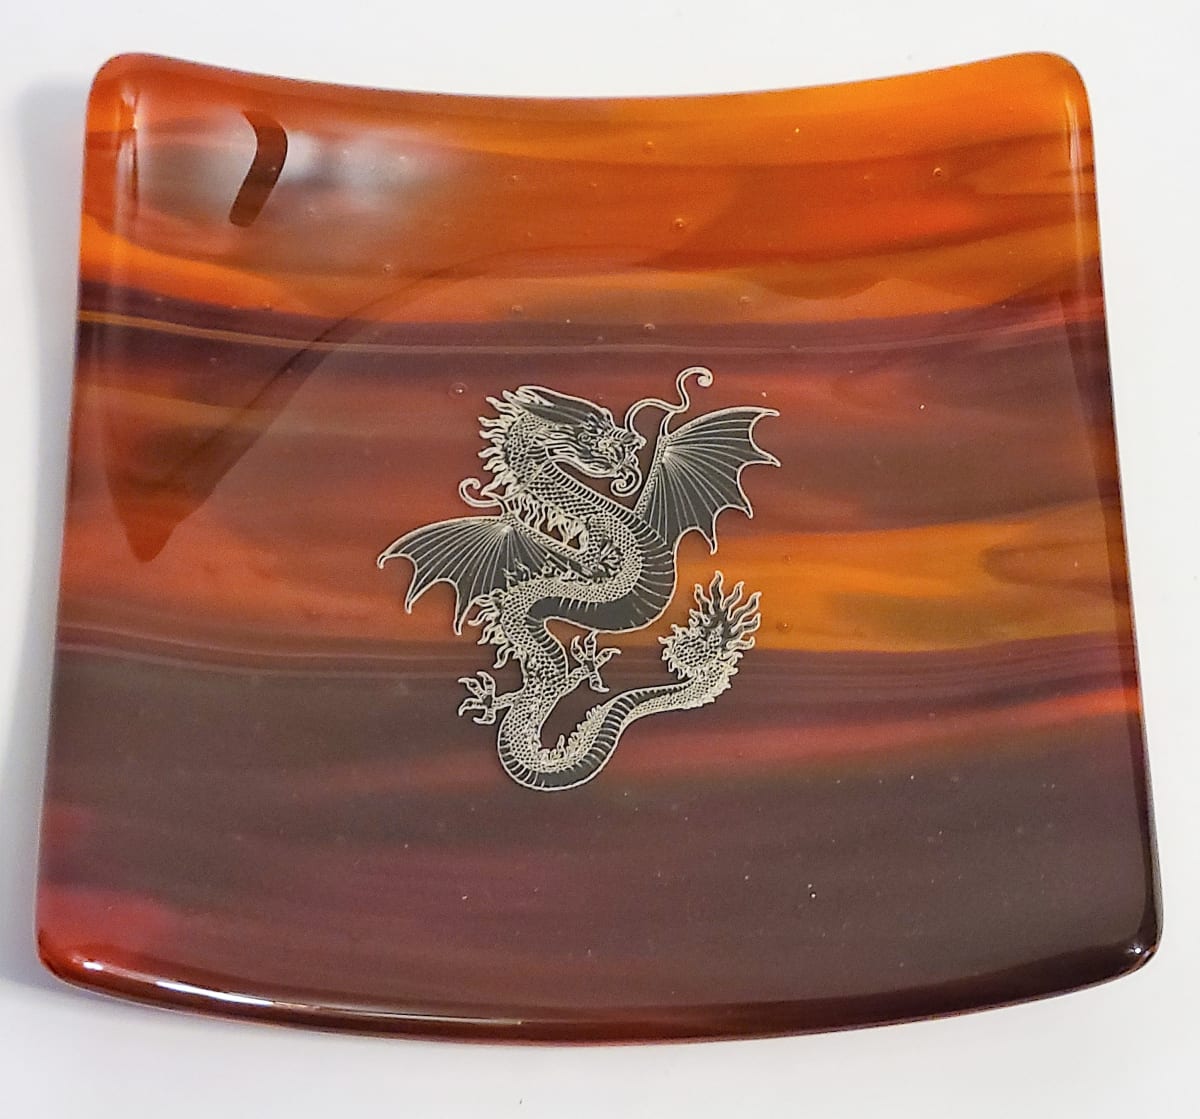 Plate with Silver Dragon Decal by Kathy Kollenburn 